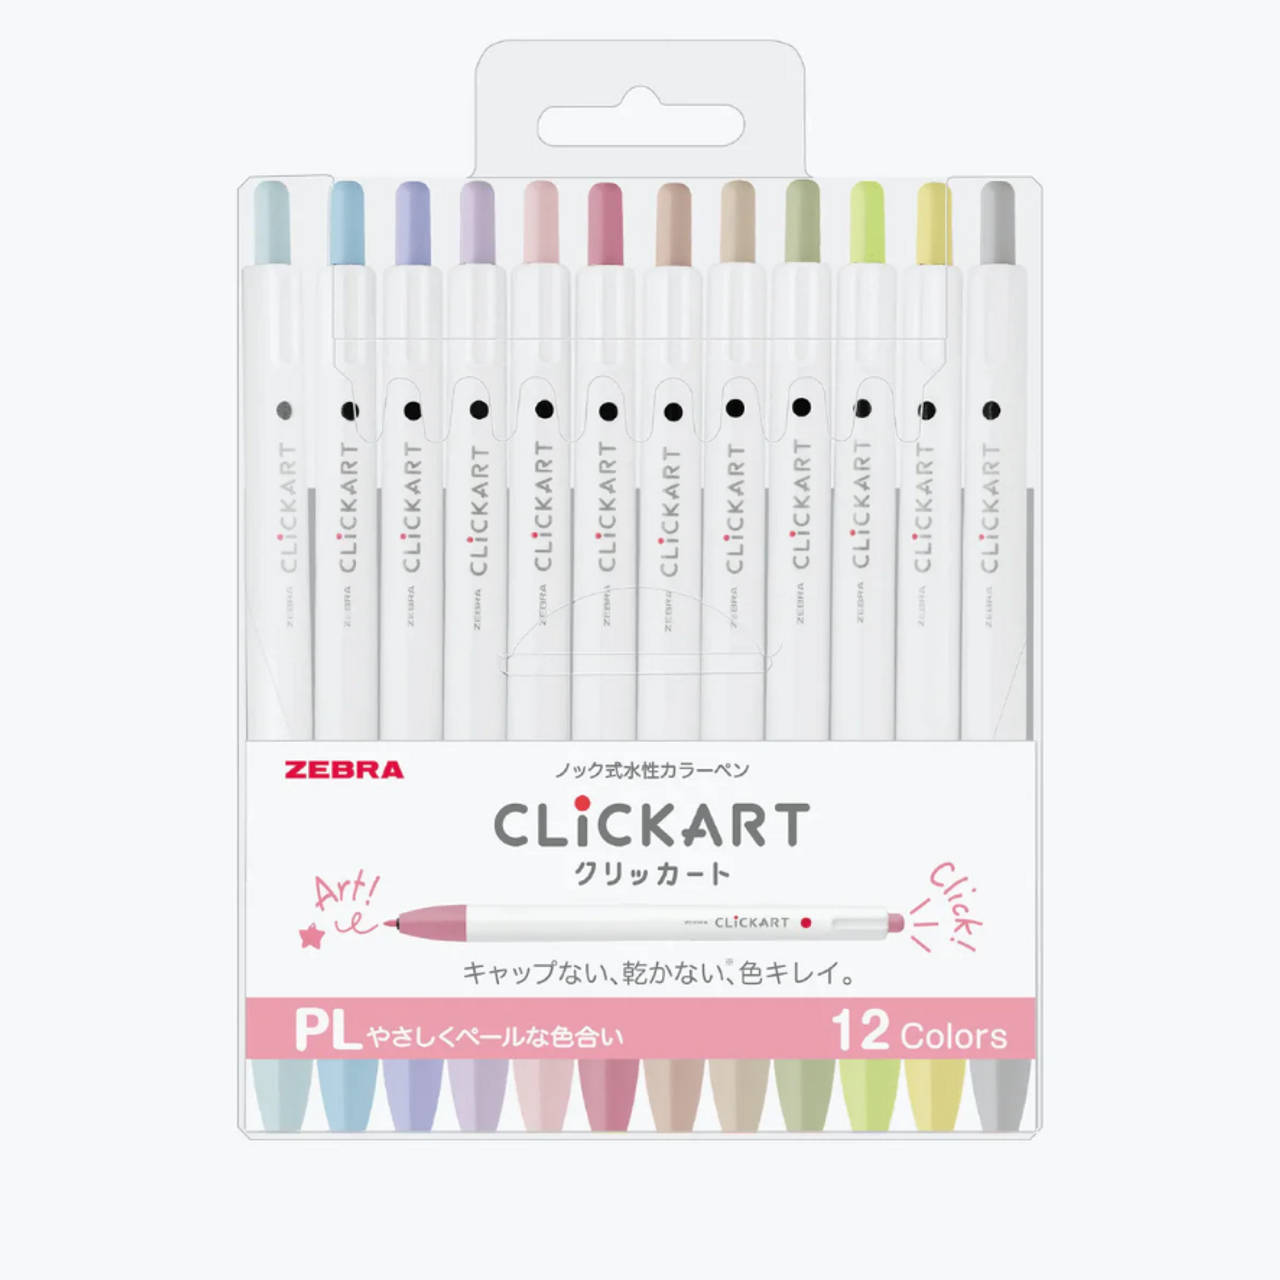 Zebra Clickart 12 Colors Set Pale Color 0.6mm tip Zebra Clickart combines is a felt tip pen with the mechanism of a ballpoint pen Winner of 2019 Good Design Award Colors in this set :  powder blue, powder pink, pale rose, lemon, lime, light khaki, soda blue, lilac, blueberry ice cream, sand beige, brown sugar and light gray